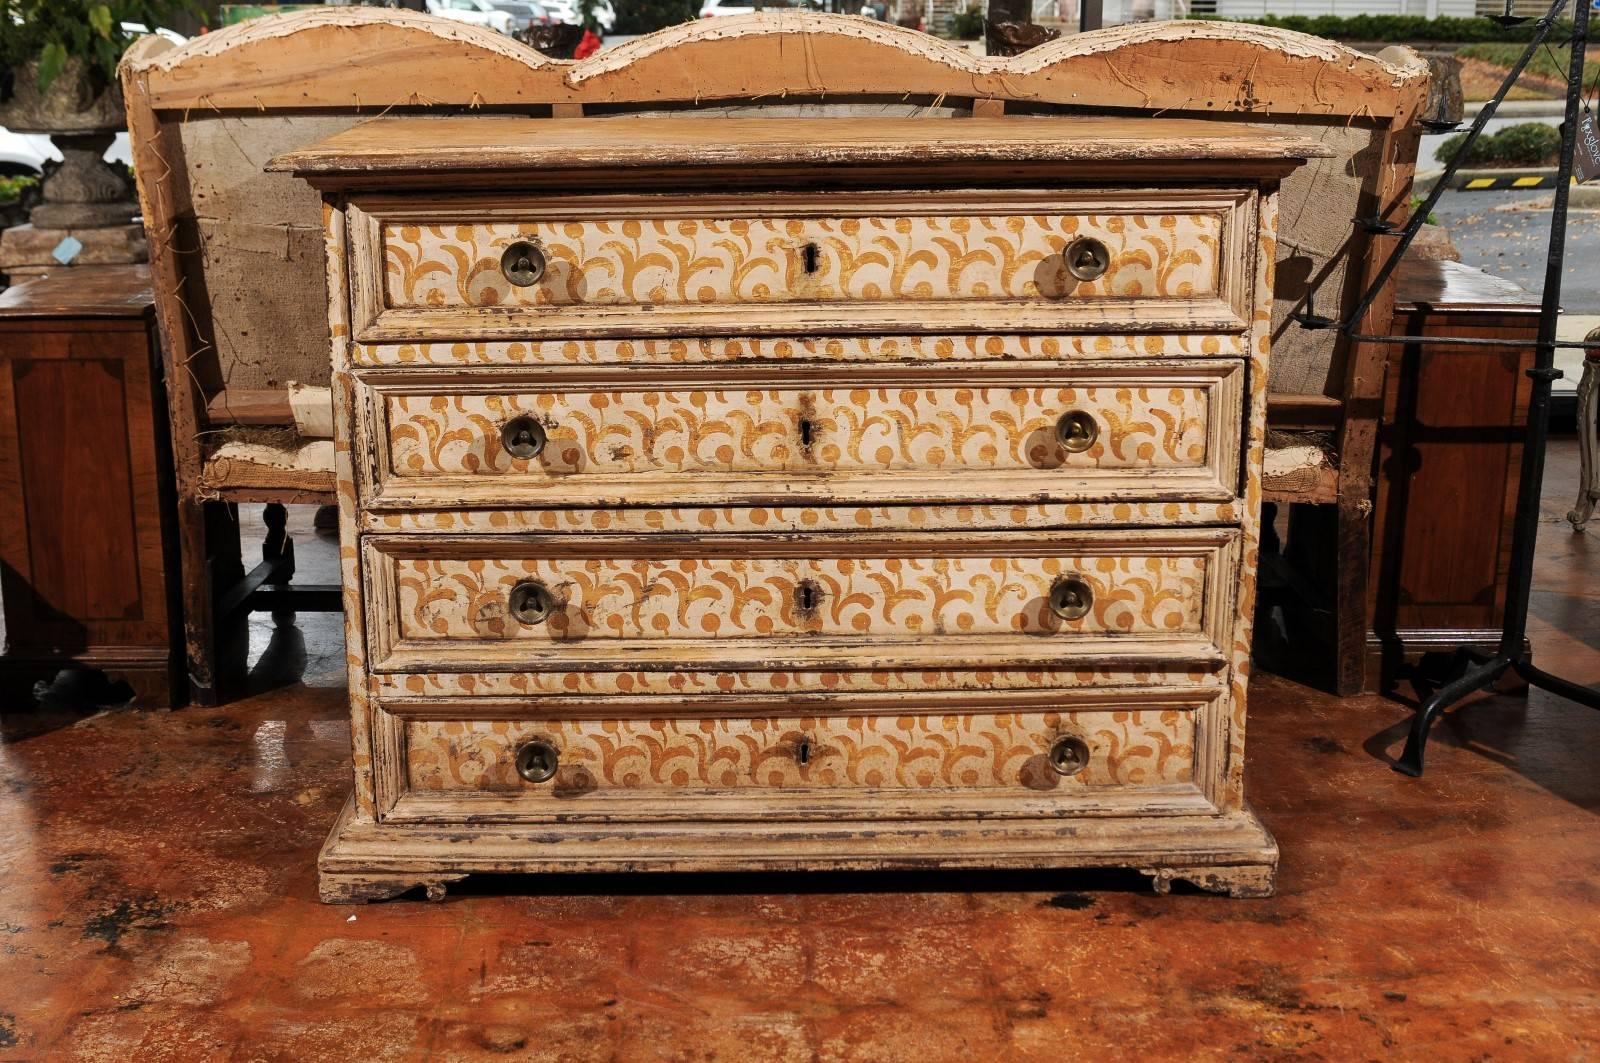 An Italian 17th century Florentine tall wooden four-drawer commode with painted floral motifs. This Italian commode was born in Tuscany, during the later years of the 17th century. Featuring a rectangular top with molded edges, the chest comprises